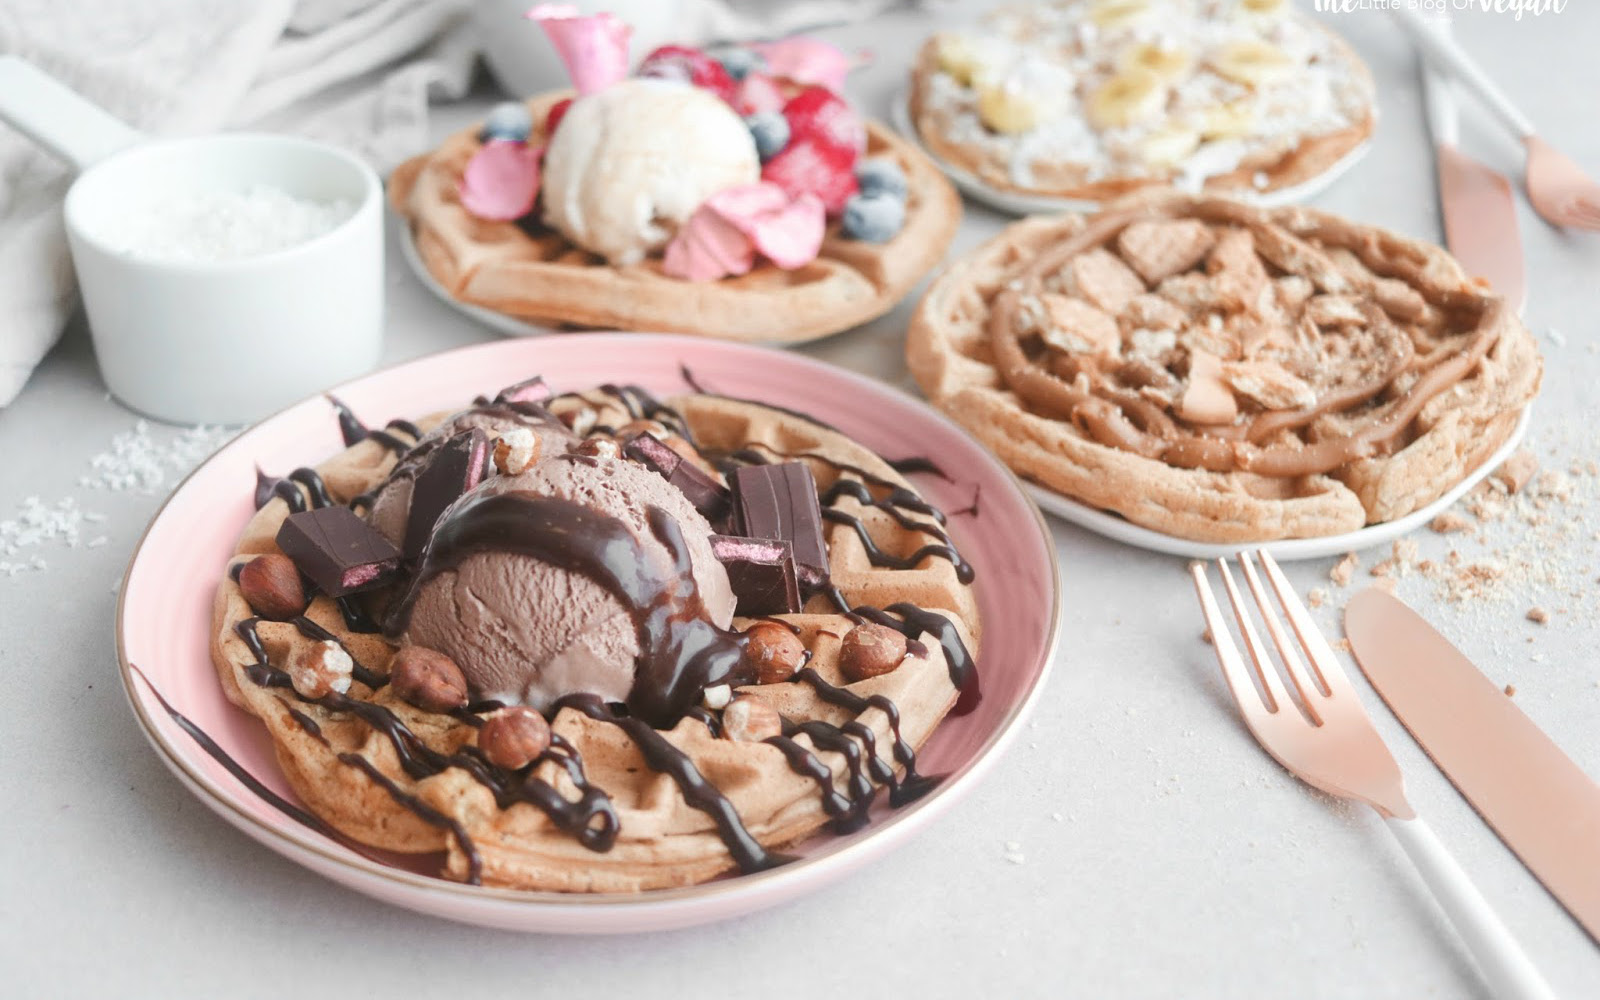 Vegan Gluten-Free Classic Wheat-Free Waffles with various toppings including chocolate ice cream